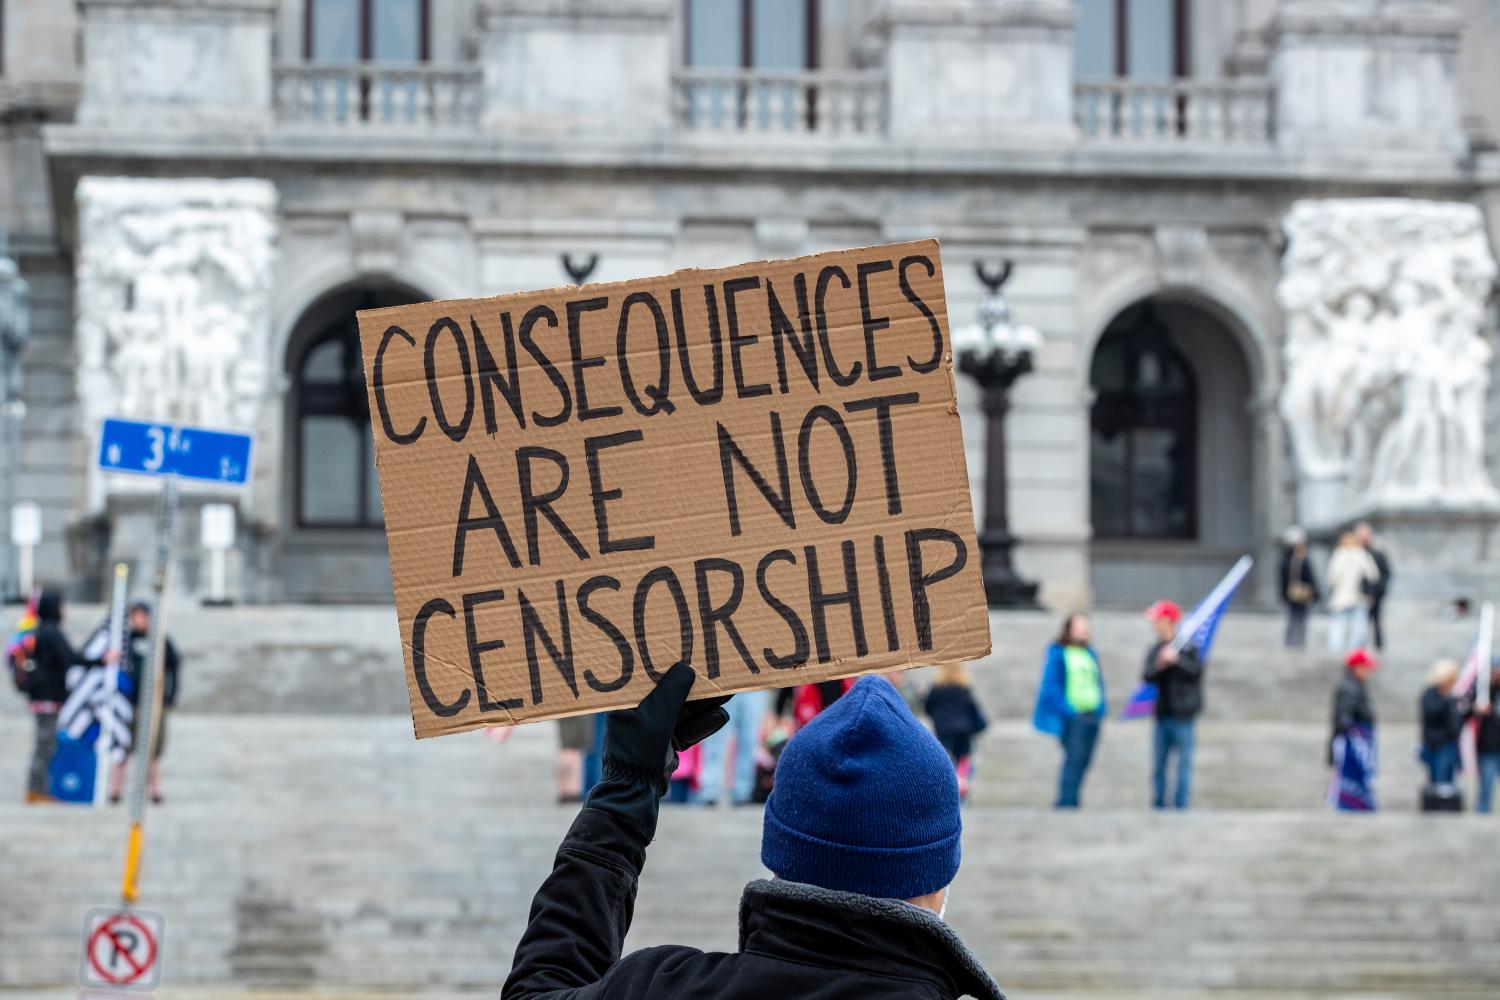 A protester holds a placard expressing his opinion across the street from the Pennsylvania State Capitol.About 40 people gathered on the steps of the Pennsylvania State Capitol for the '1st Amendment--Conservatives Being Censored' rally. (Photo by Paul Weaver / SOPA Images/Sipa USA)No Use Germany.